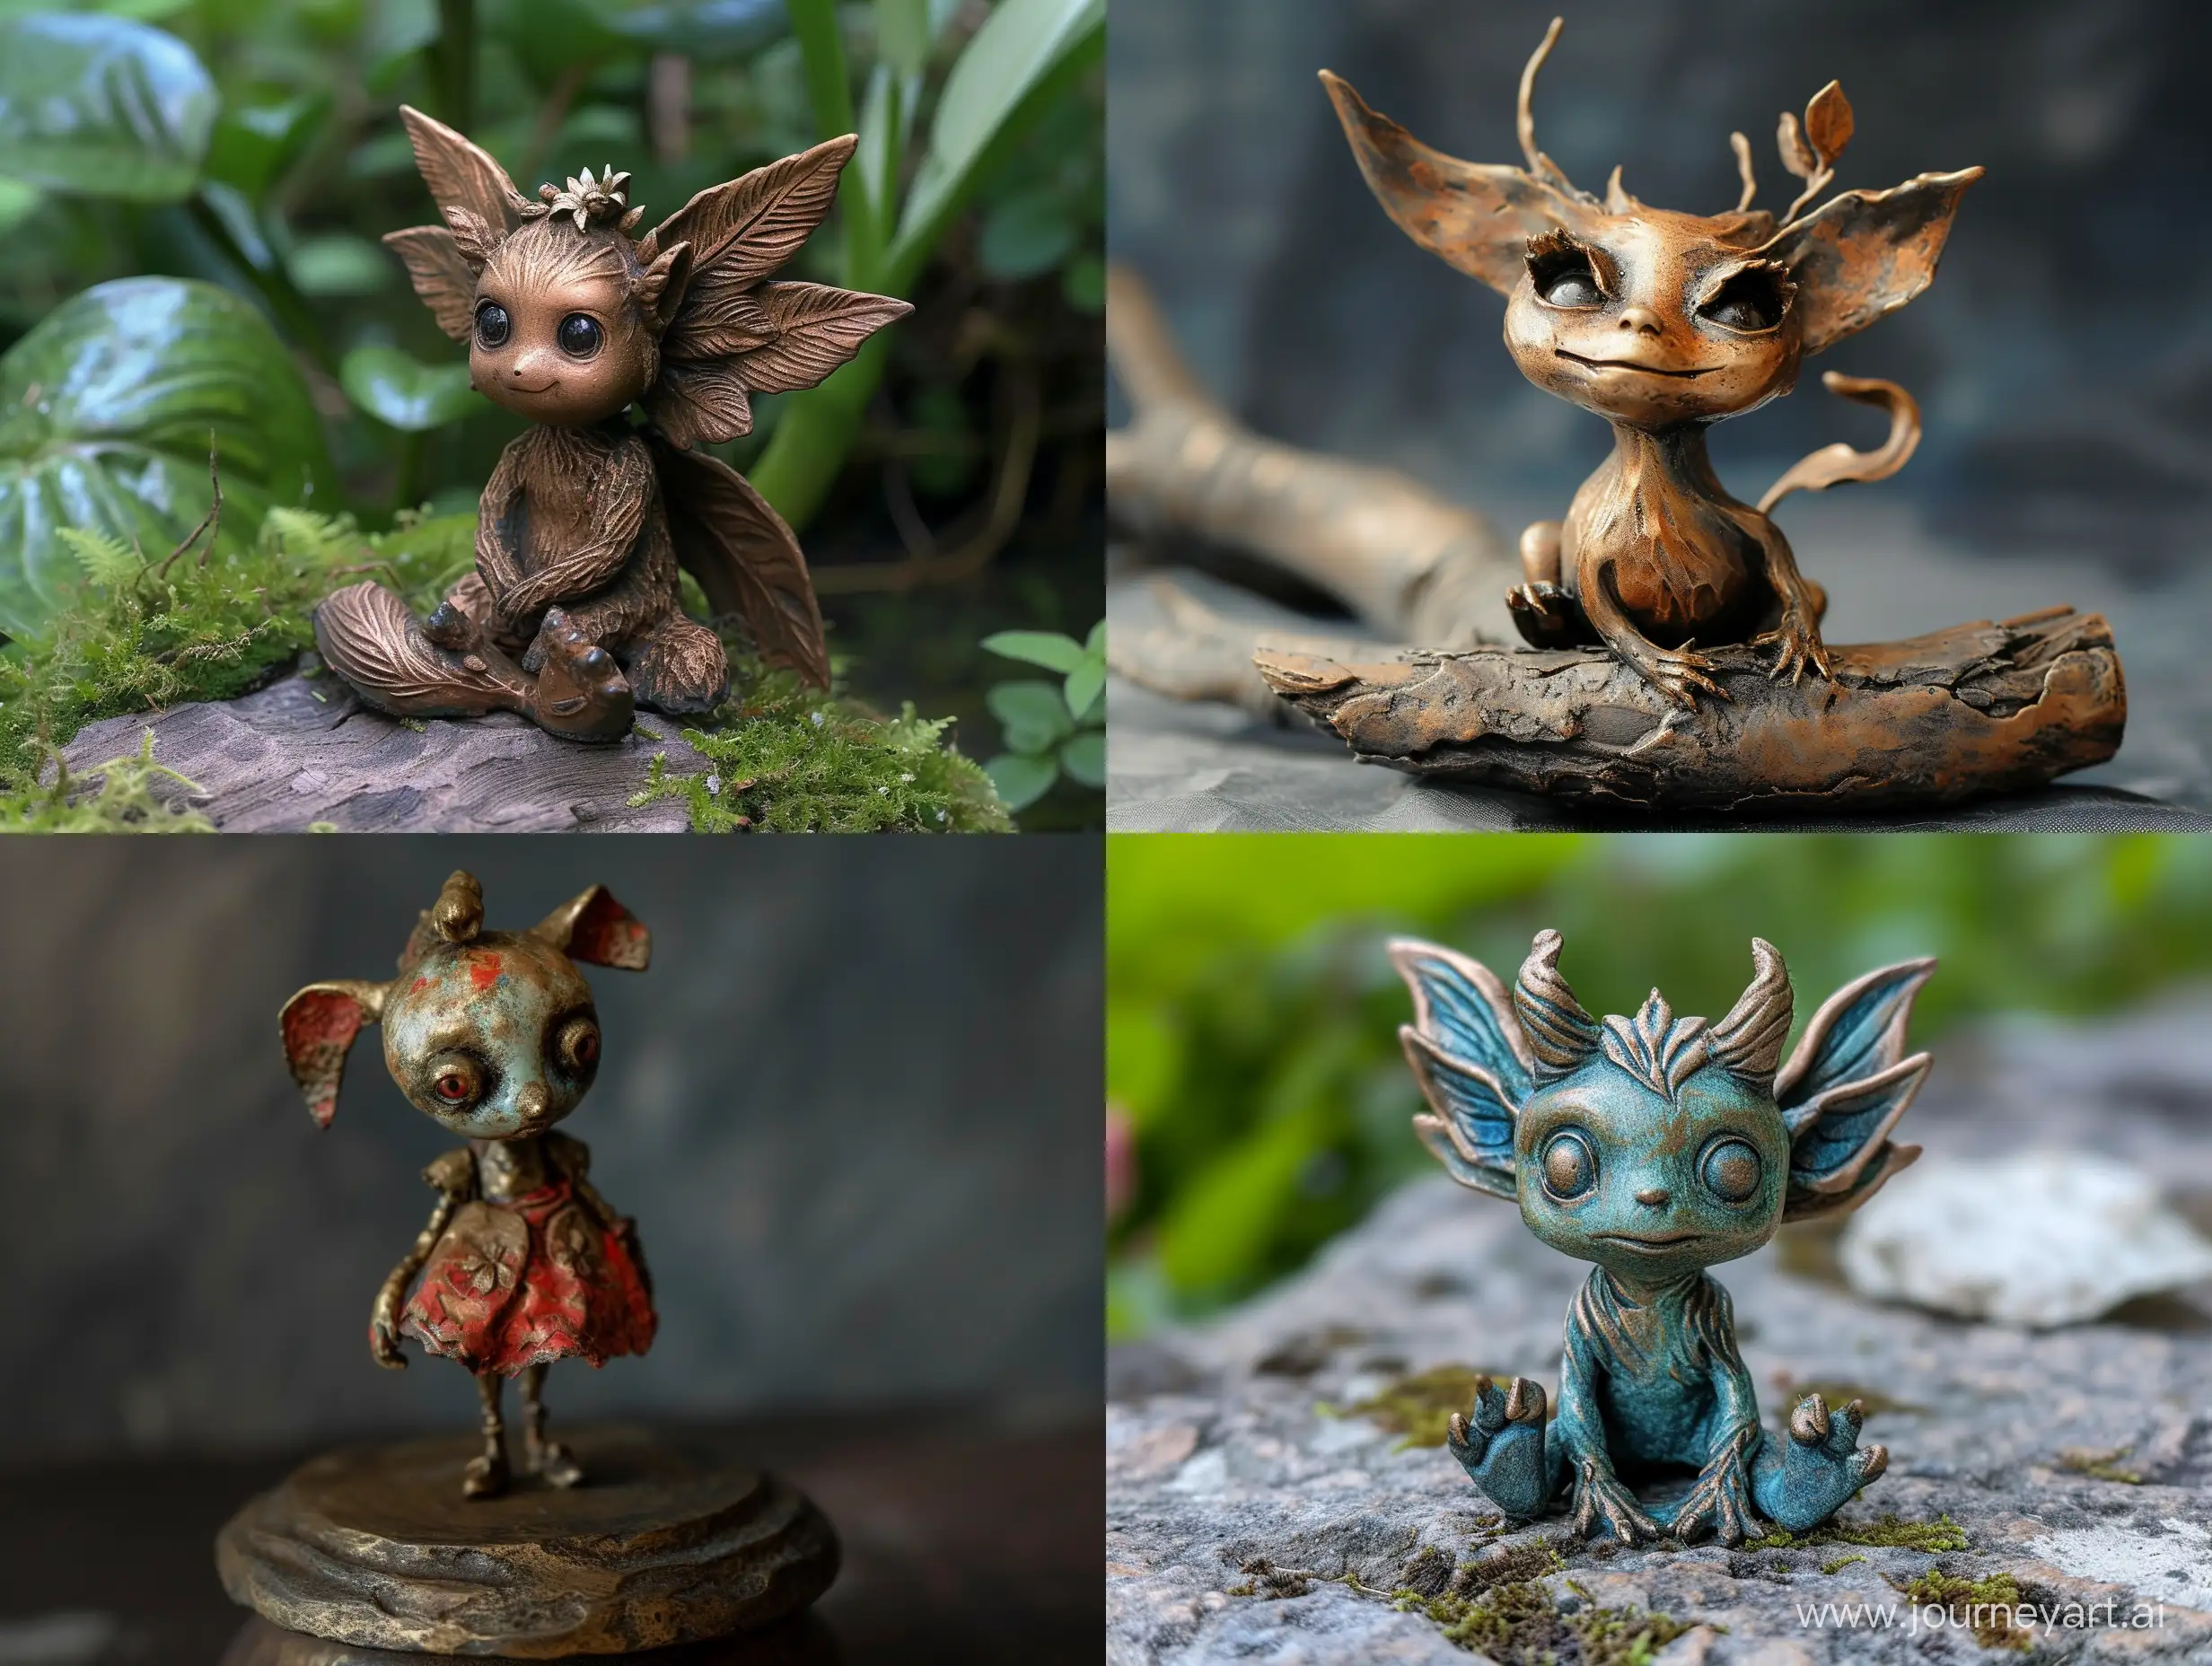 Enchanting-Bronze-FairyTale-Figurine-Featuring-a-Cute-NonExistent-Animal